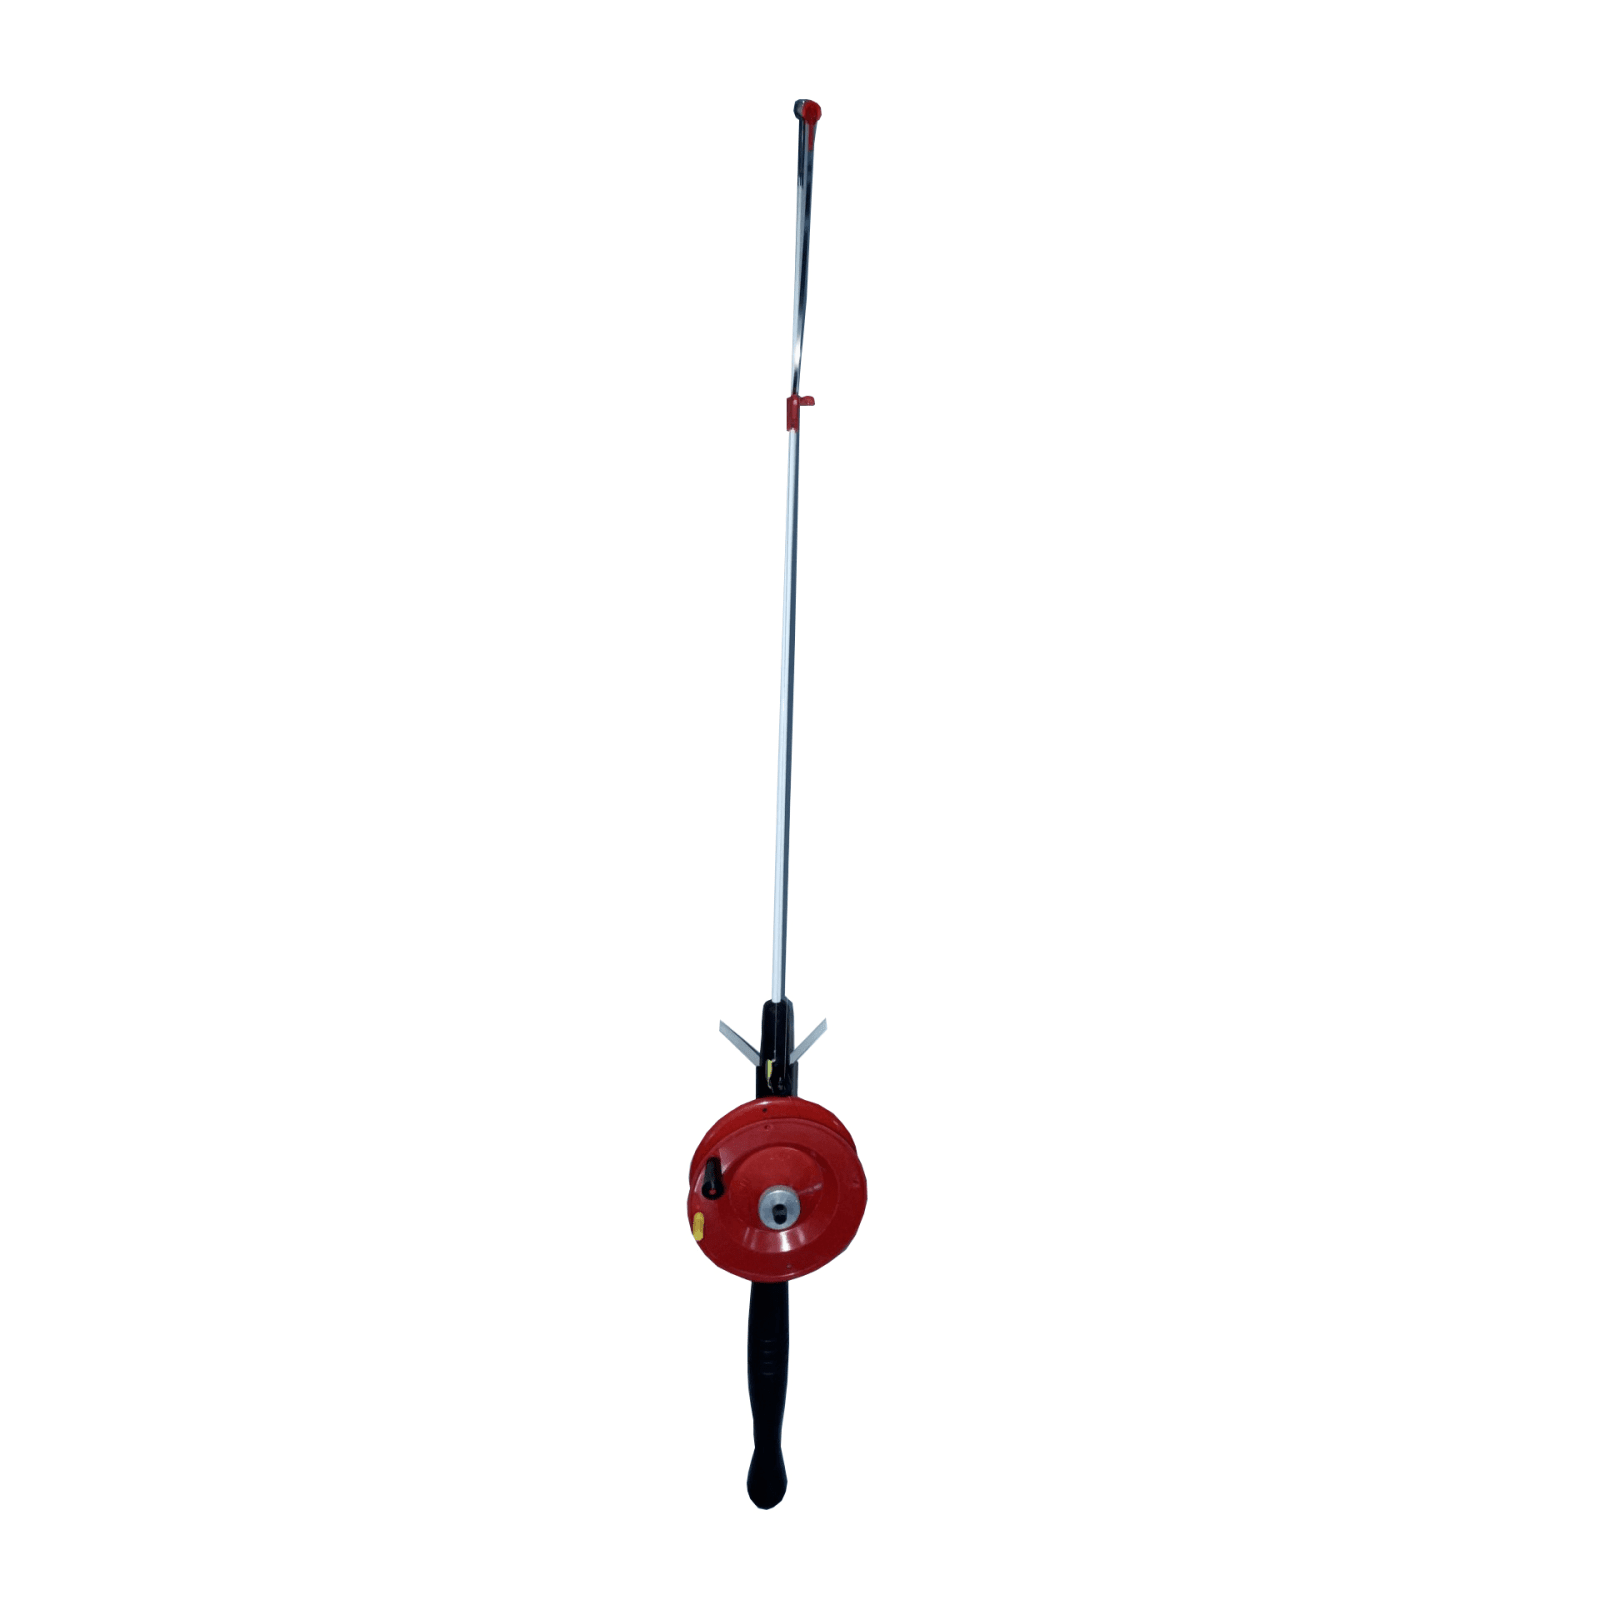 26-inch Spring Bobber Ice Combo by Schooley at Fleet Farm